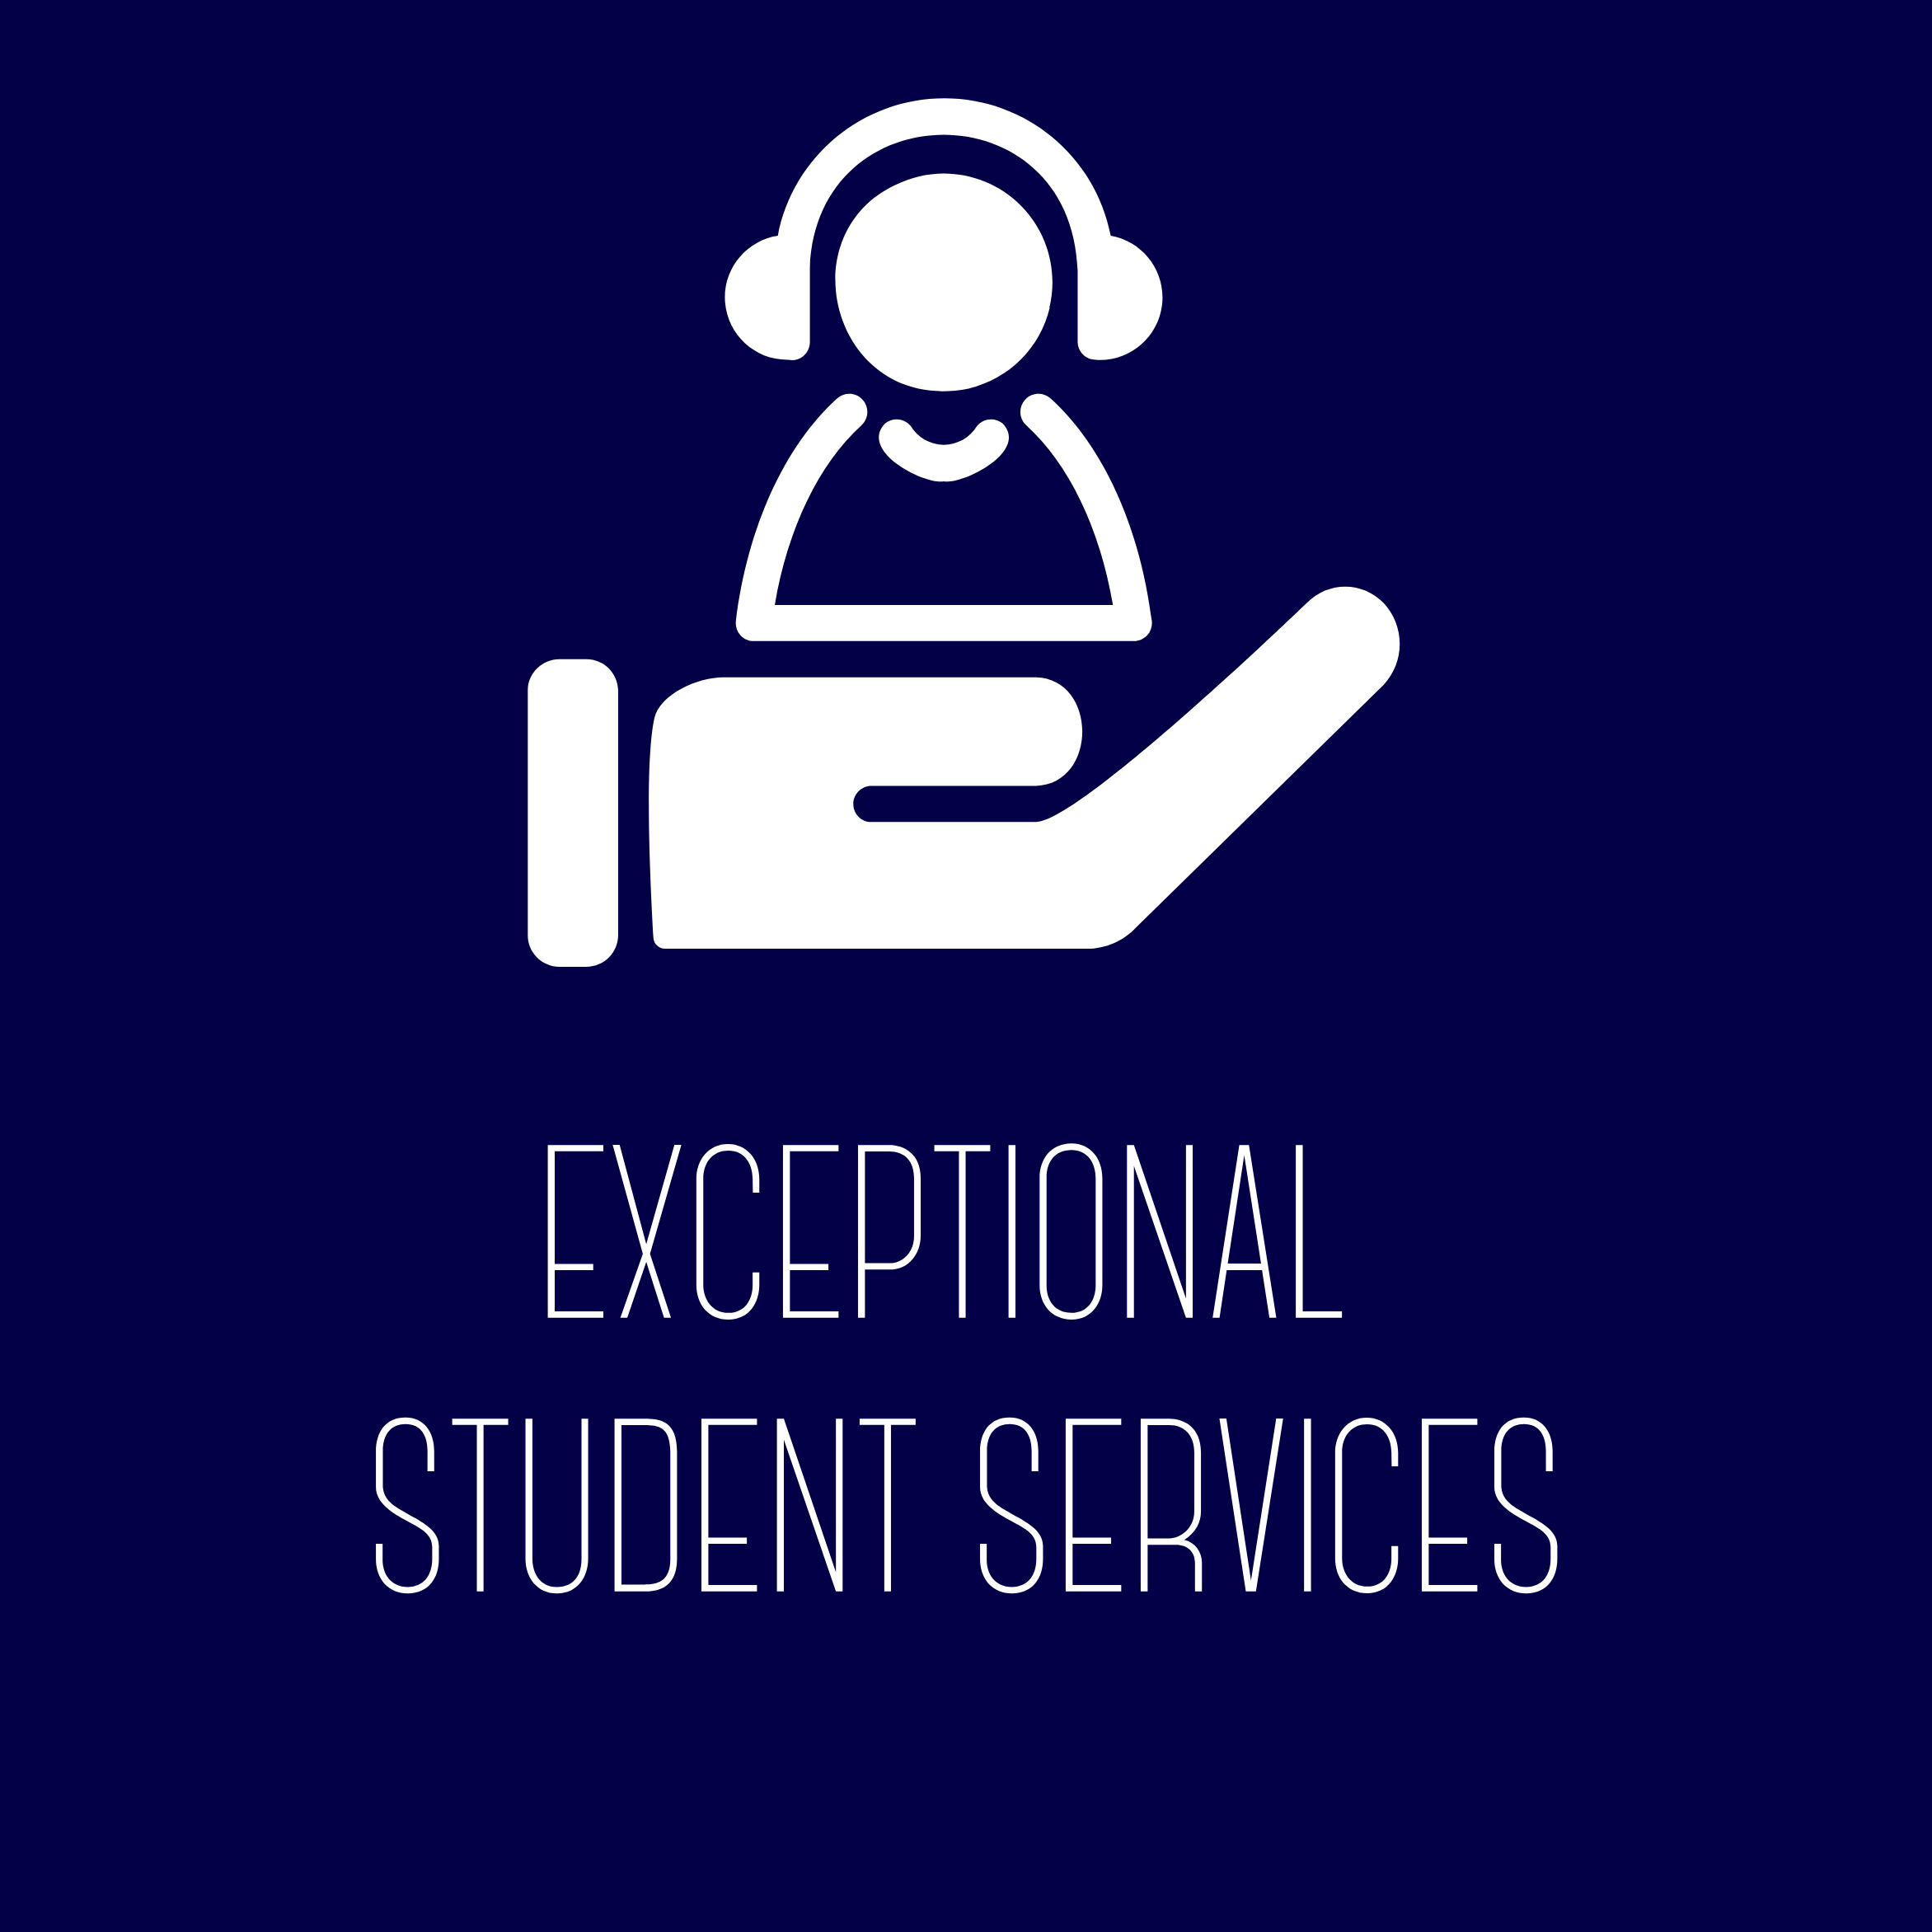 Exceptional Student Services